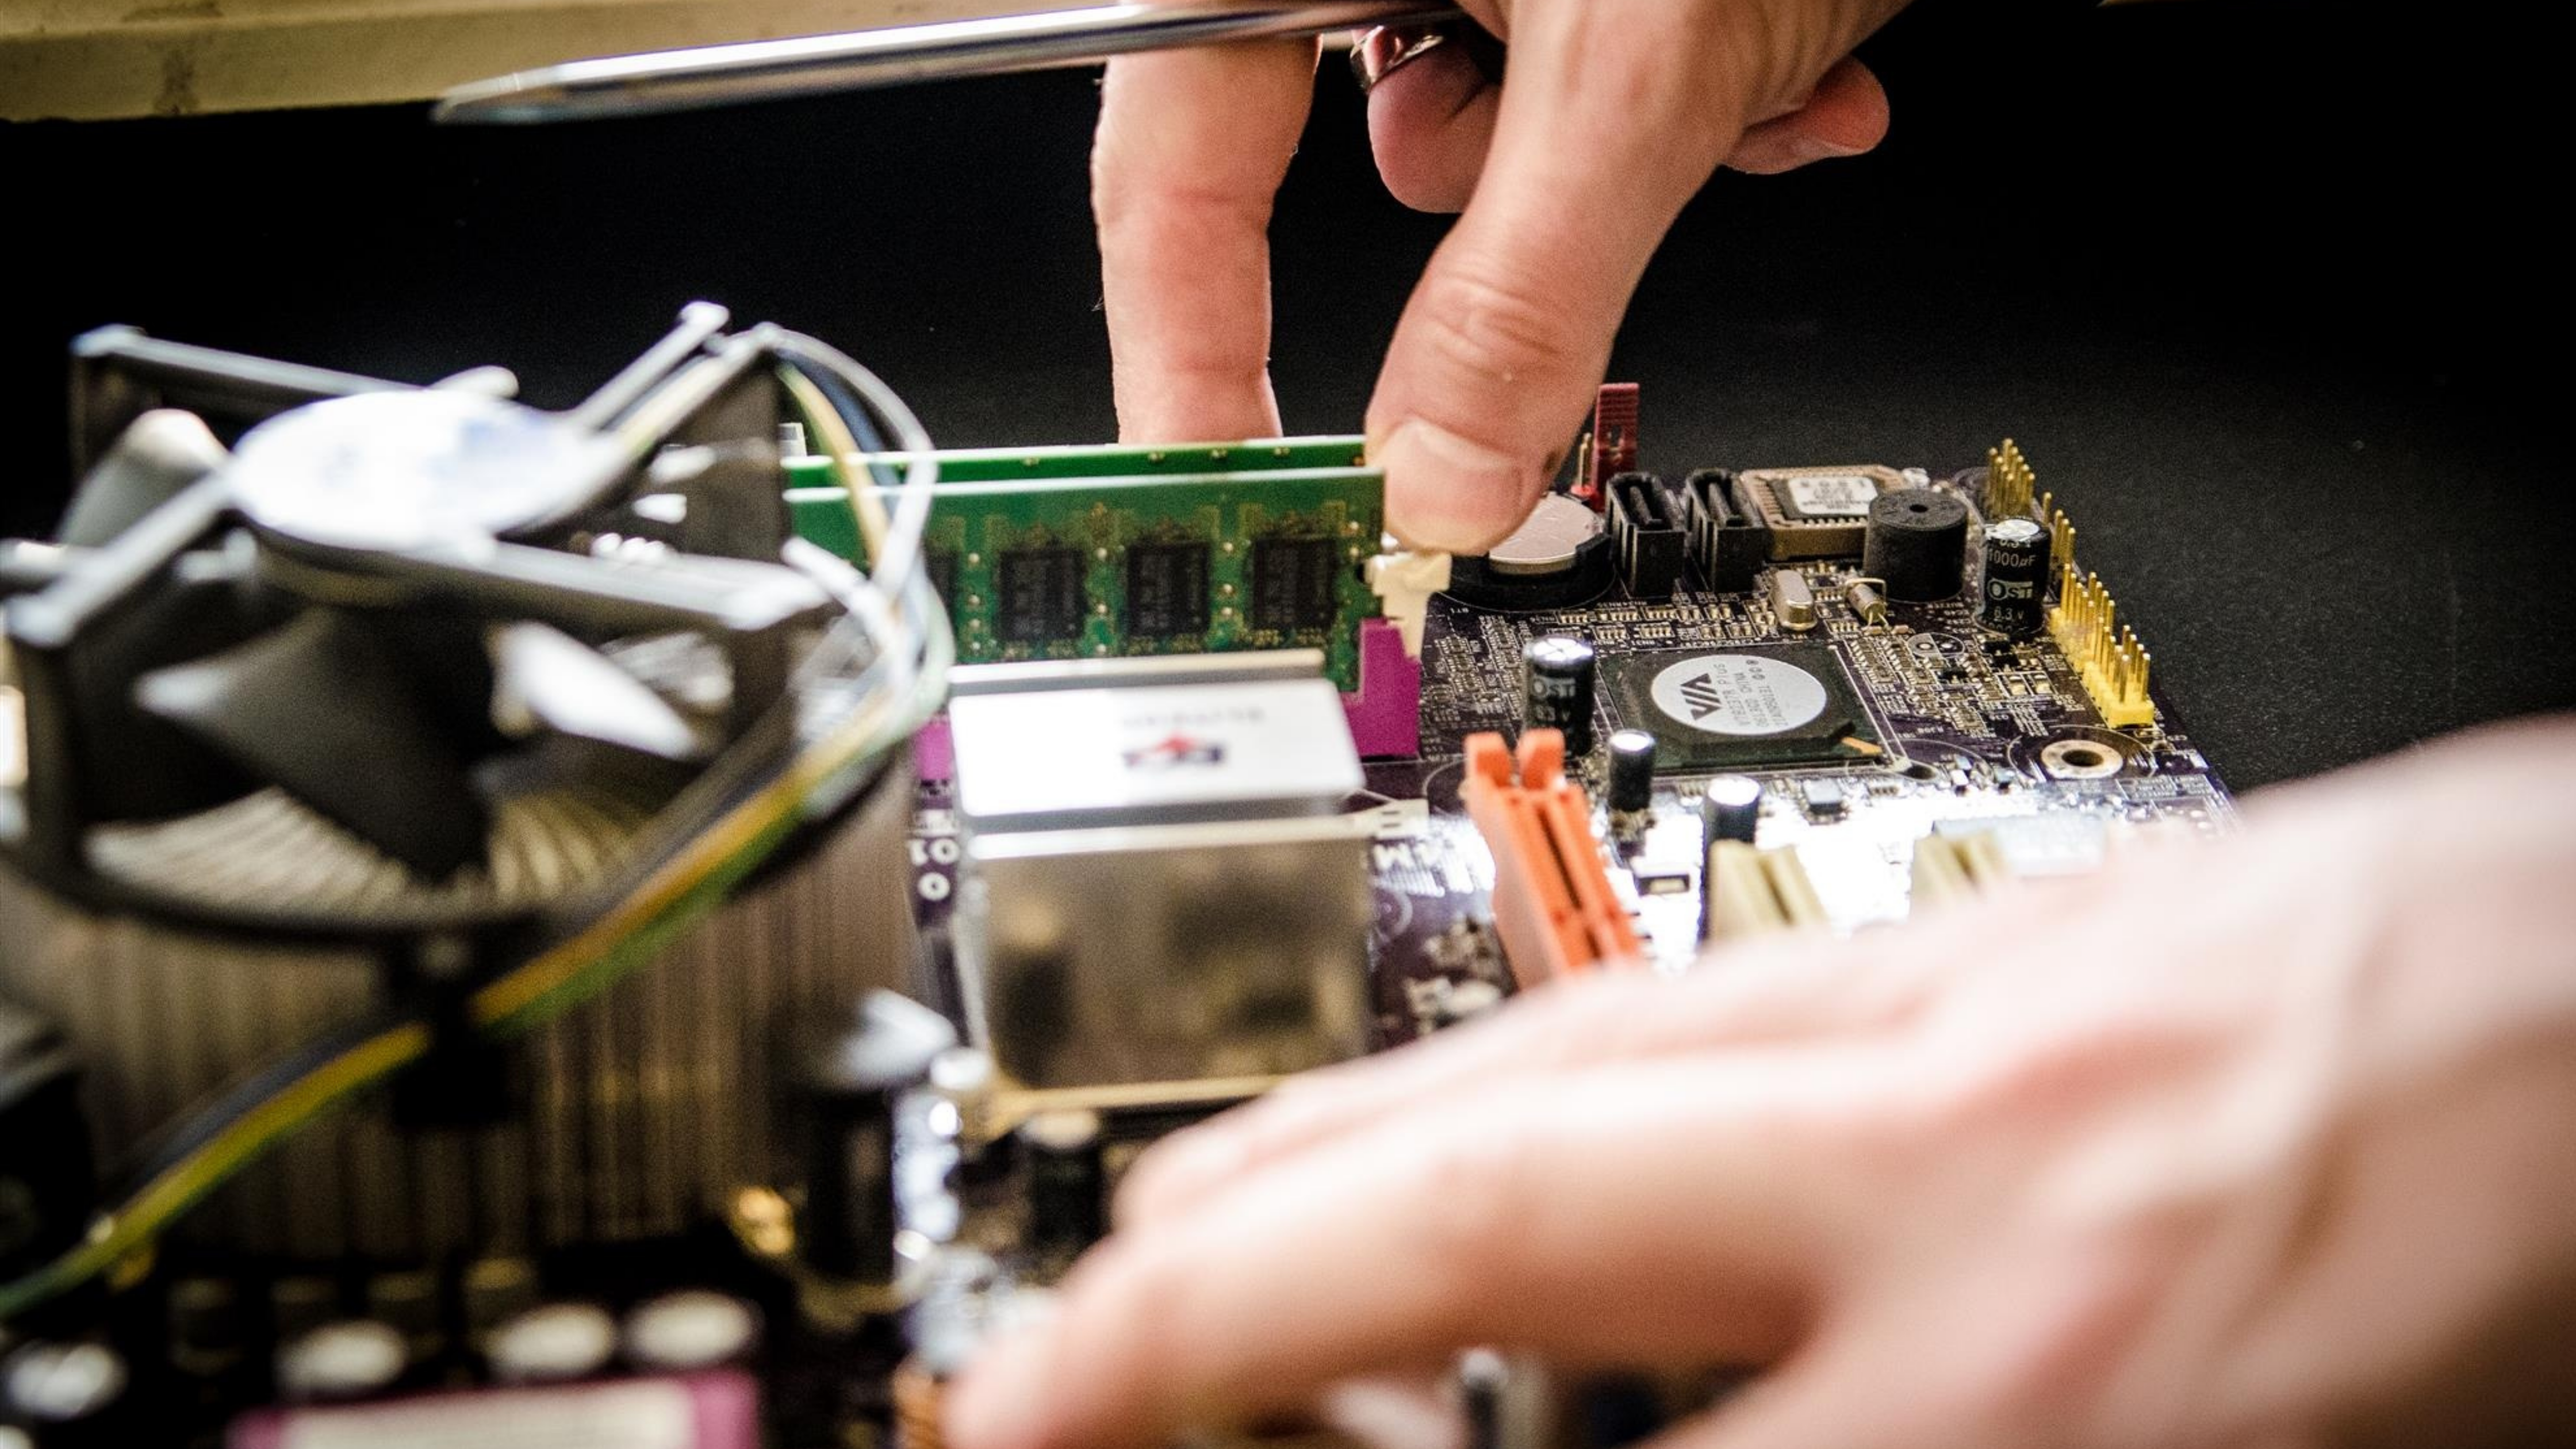 An up close image of a computer repair being performed.